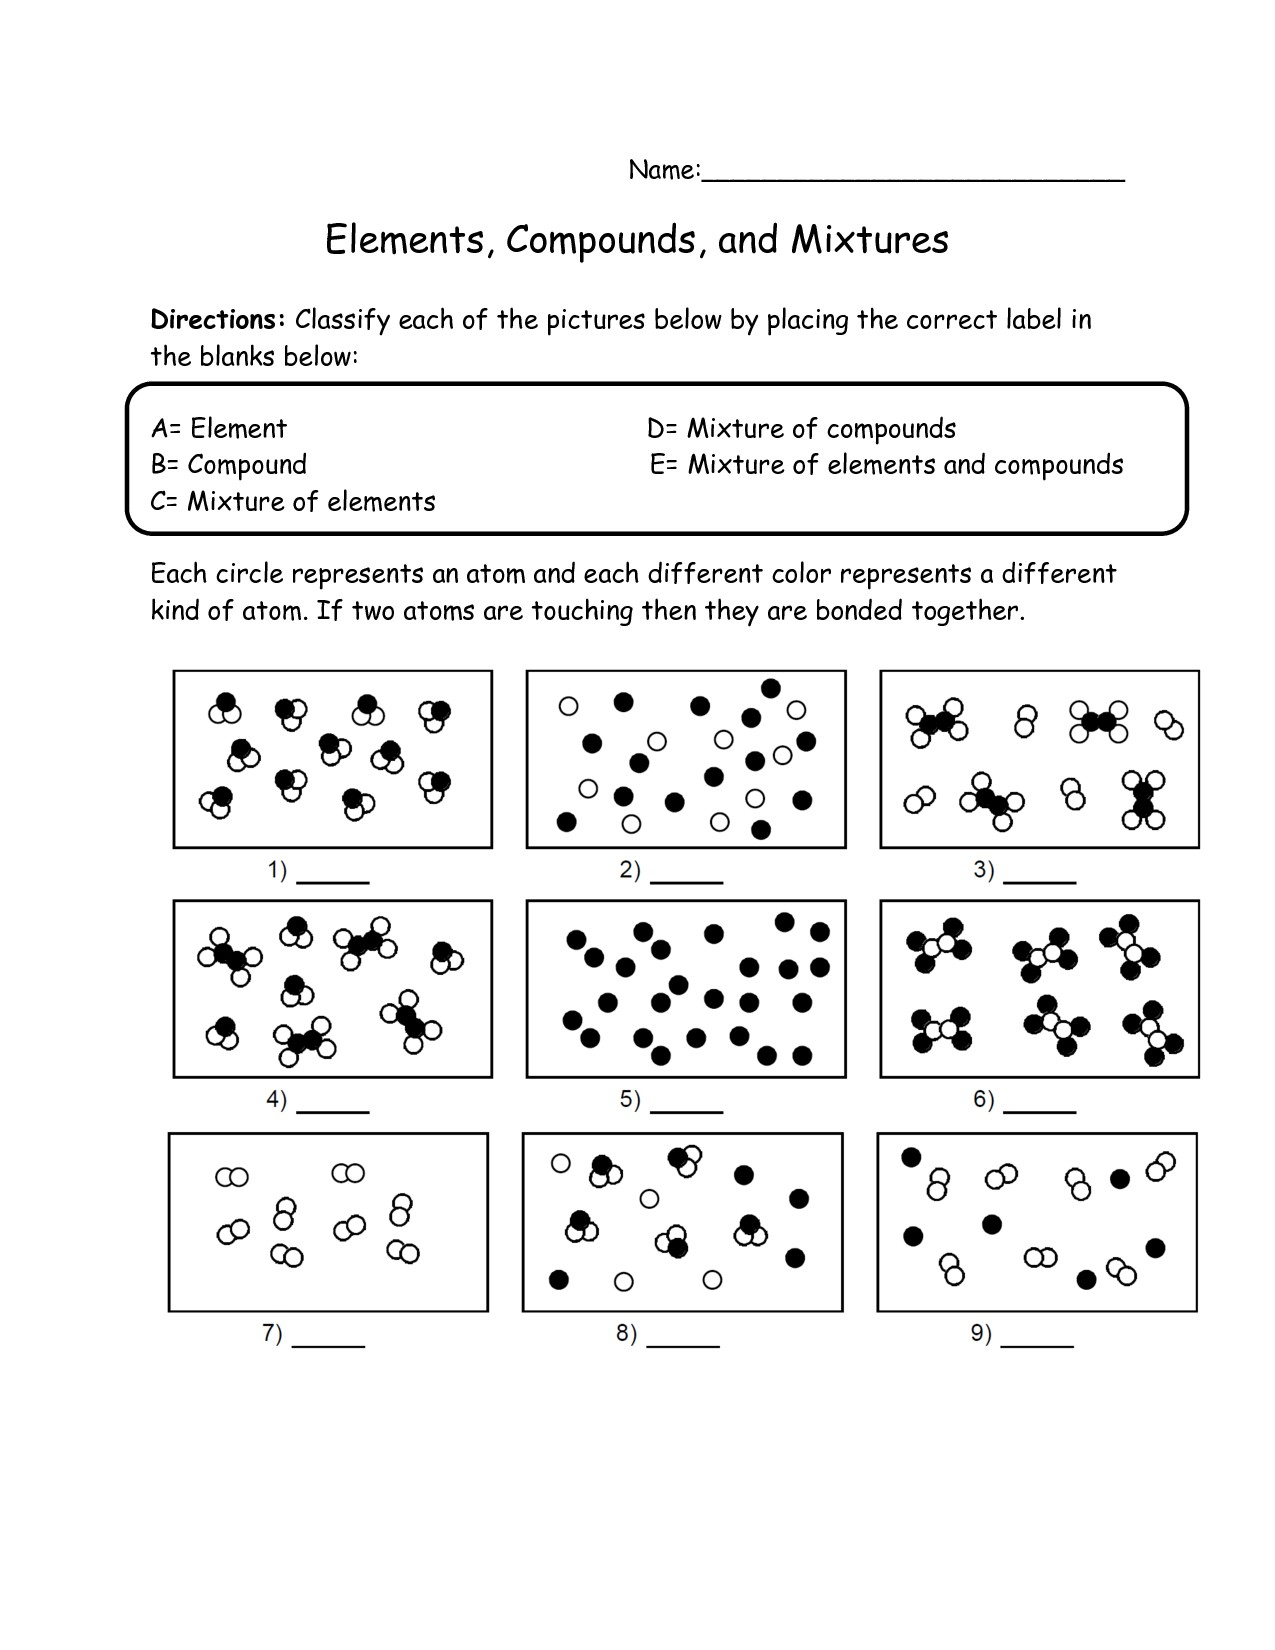 Elements Compounds And Mixtures Coloring Worksheet Answers